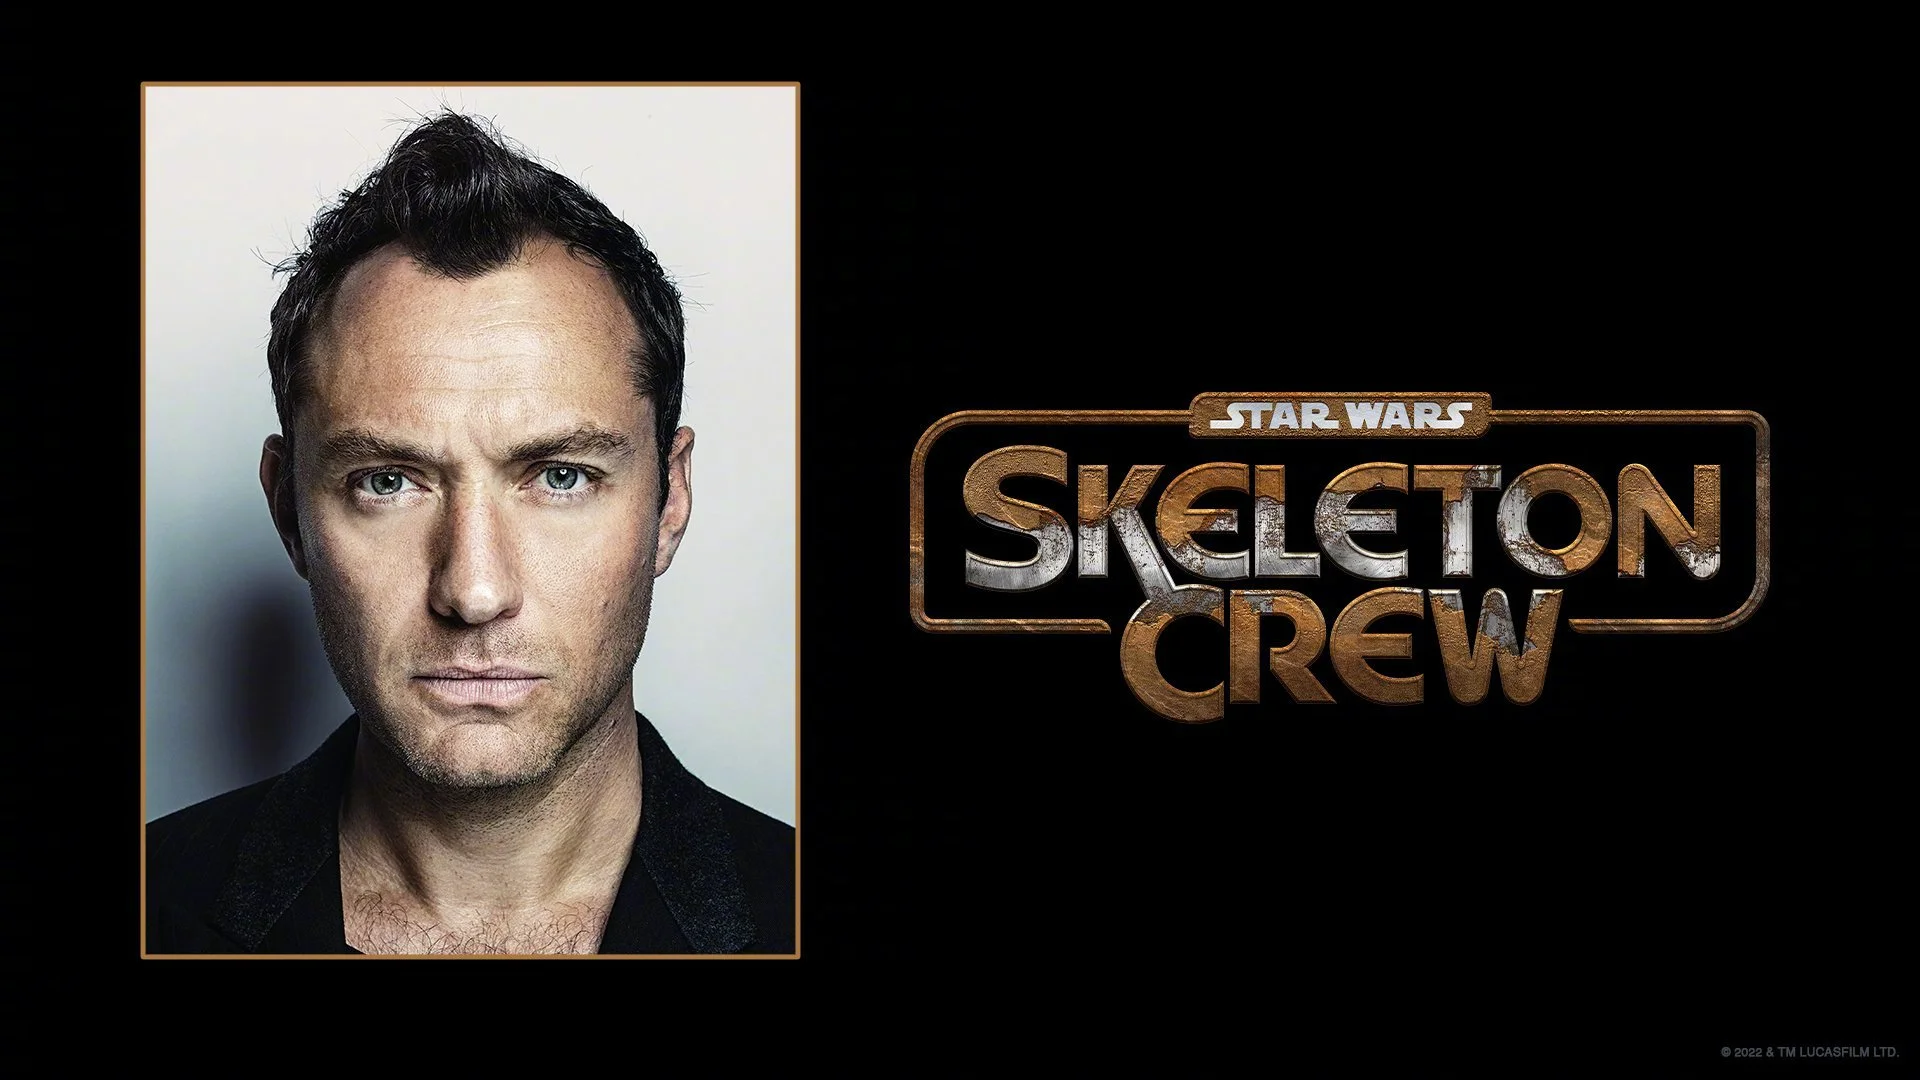 Jude Law to star in new "Star Wars" spin-off TV series "Star Wars: Skeleton Crew"